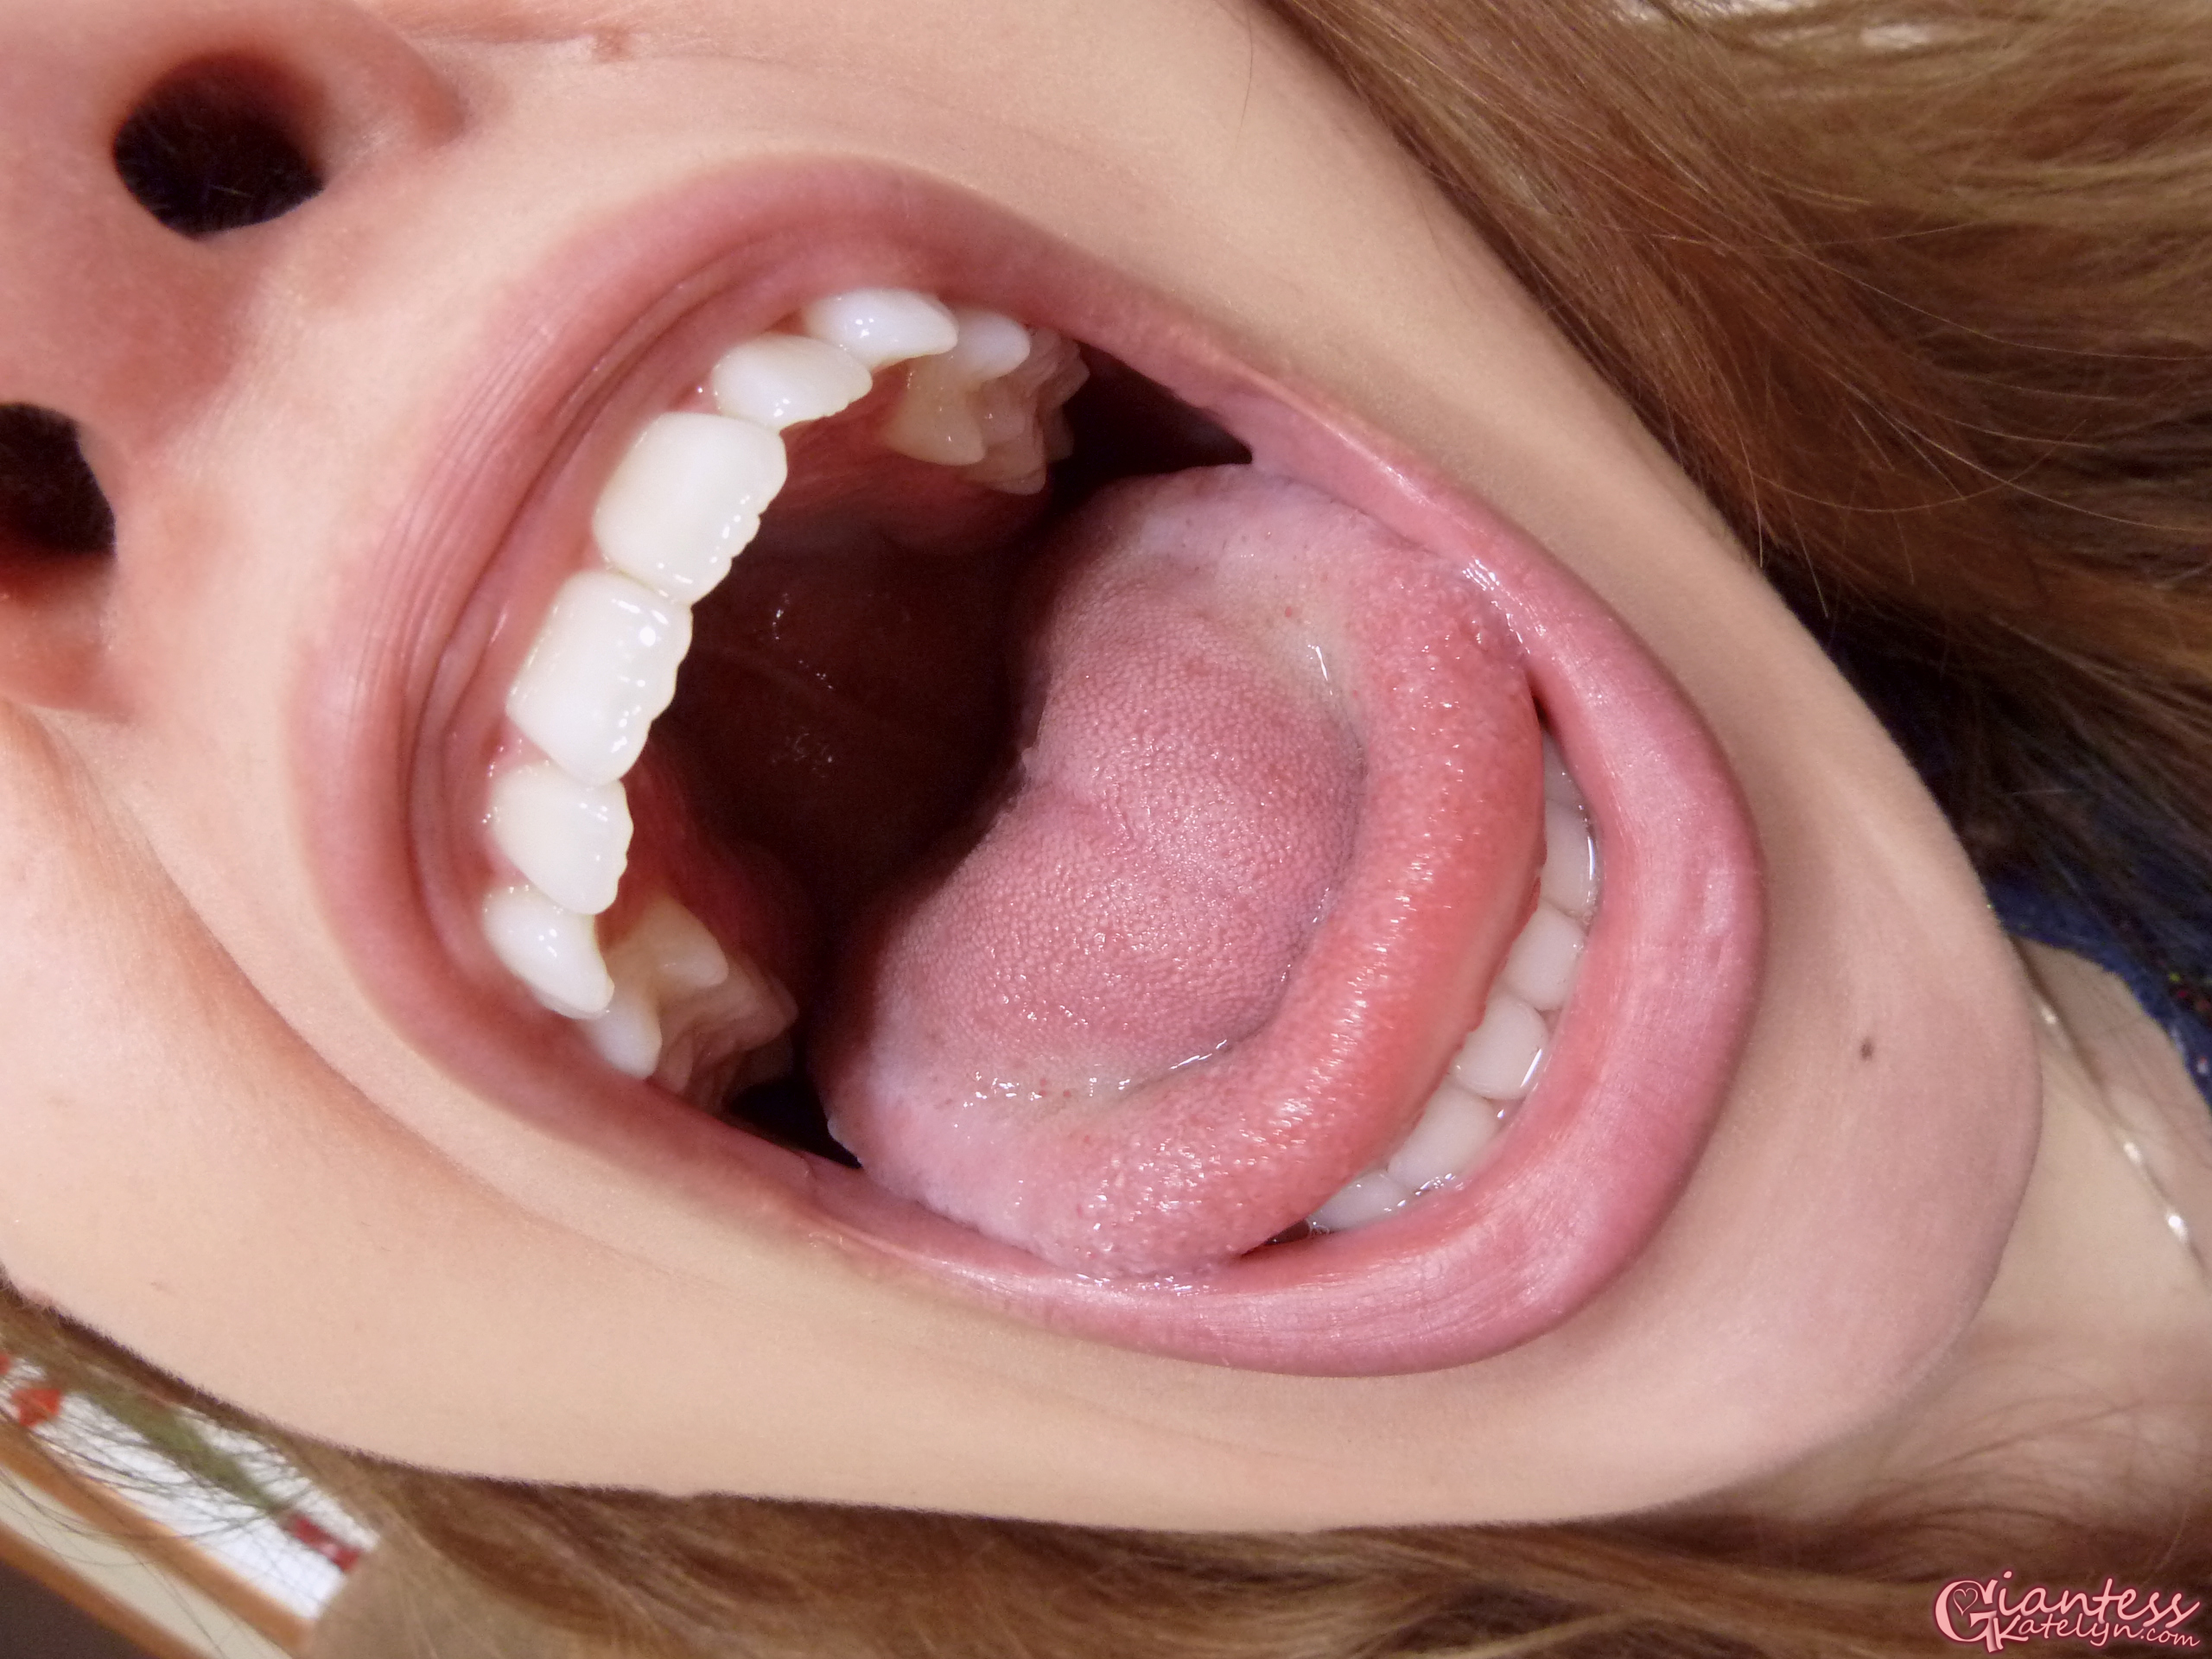 Katelyn Brooks showing the inside of her mouth